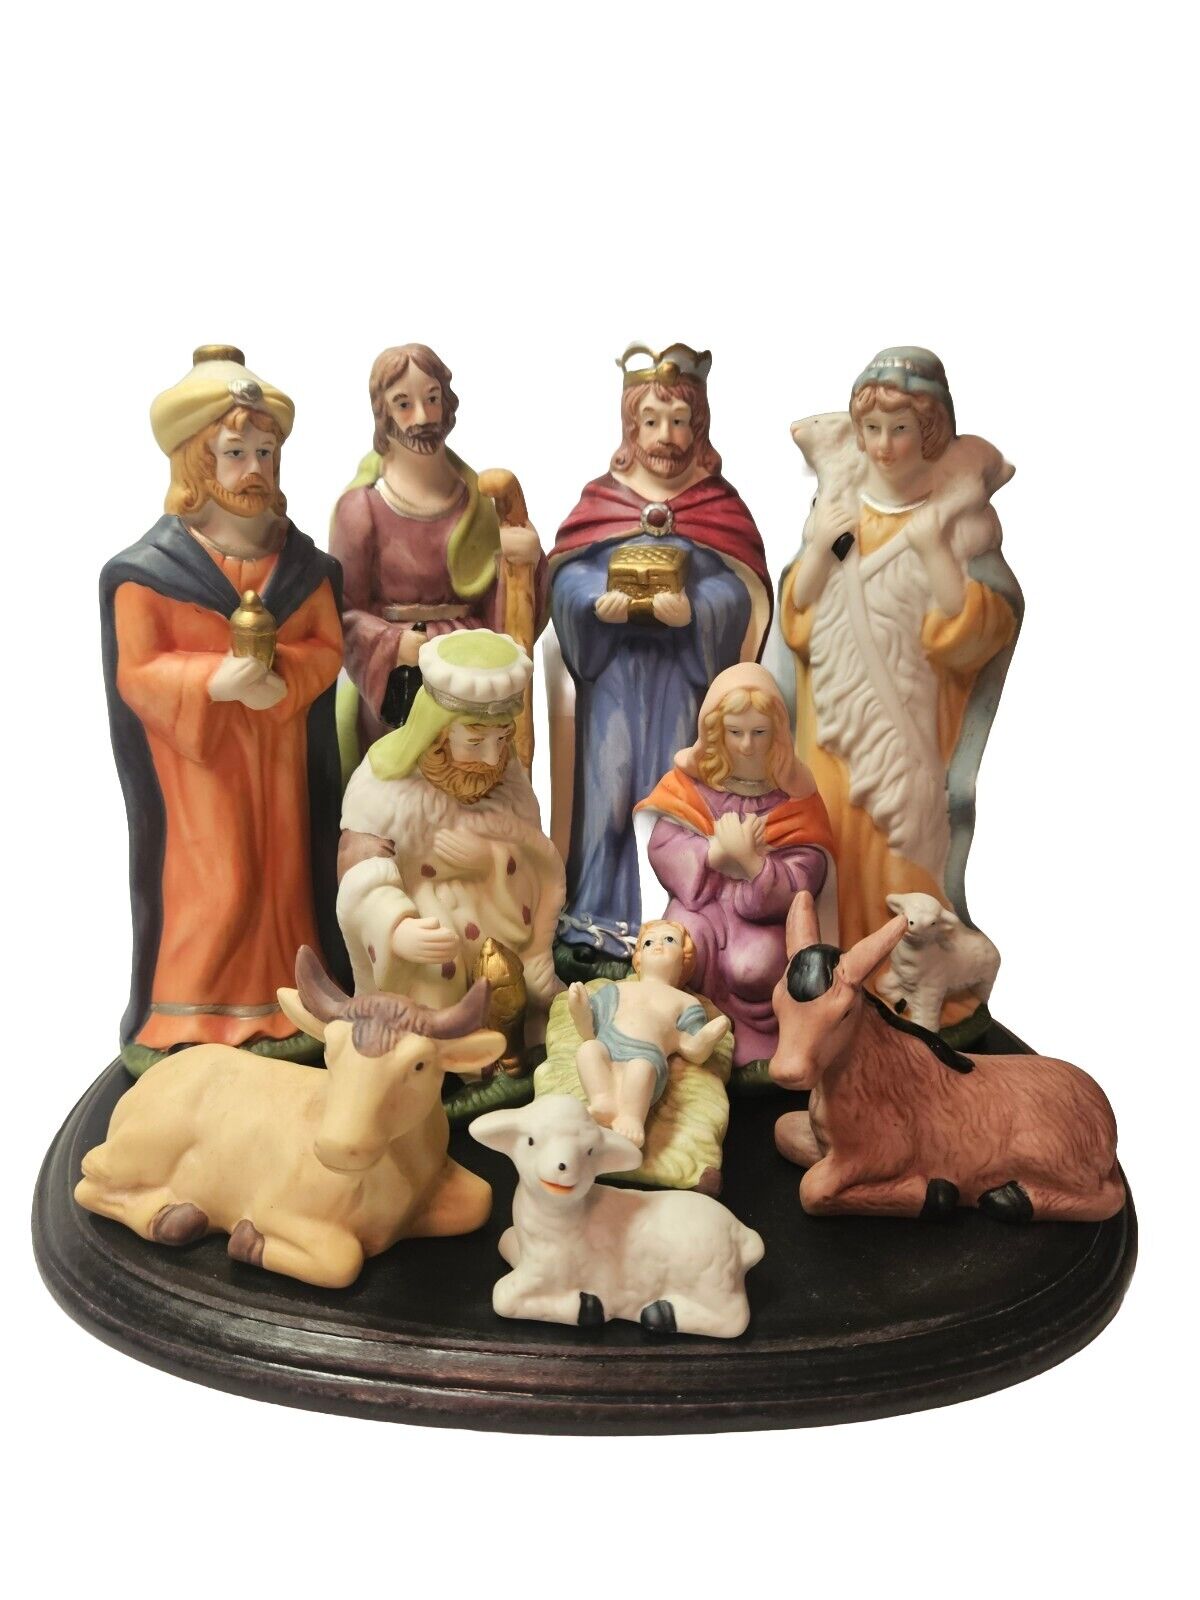 Vintage JC Penney Nativity Scene Porcelain Hand PAINTED 11 Piece In Box 2003